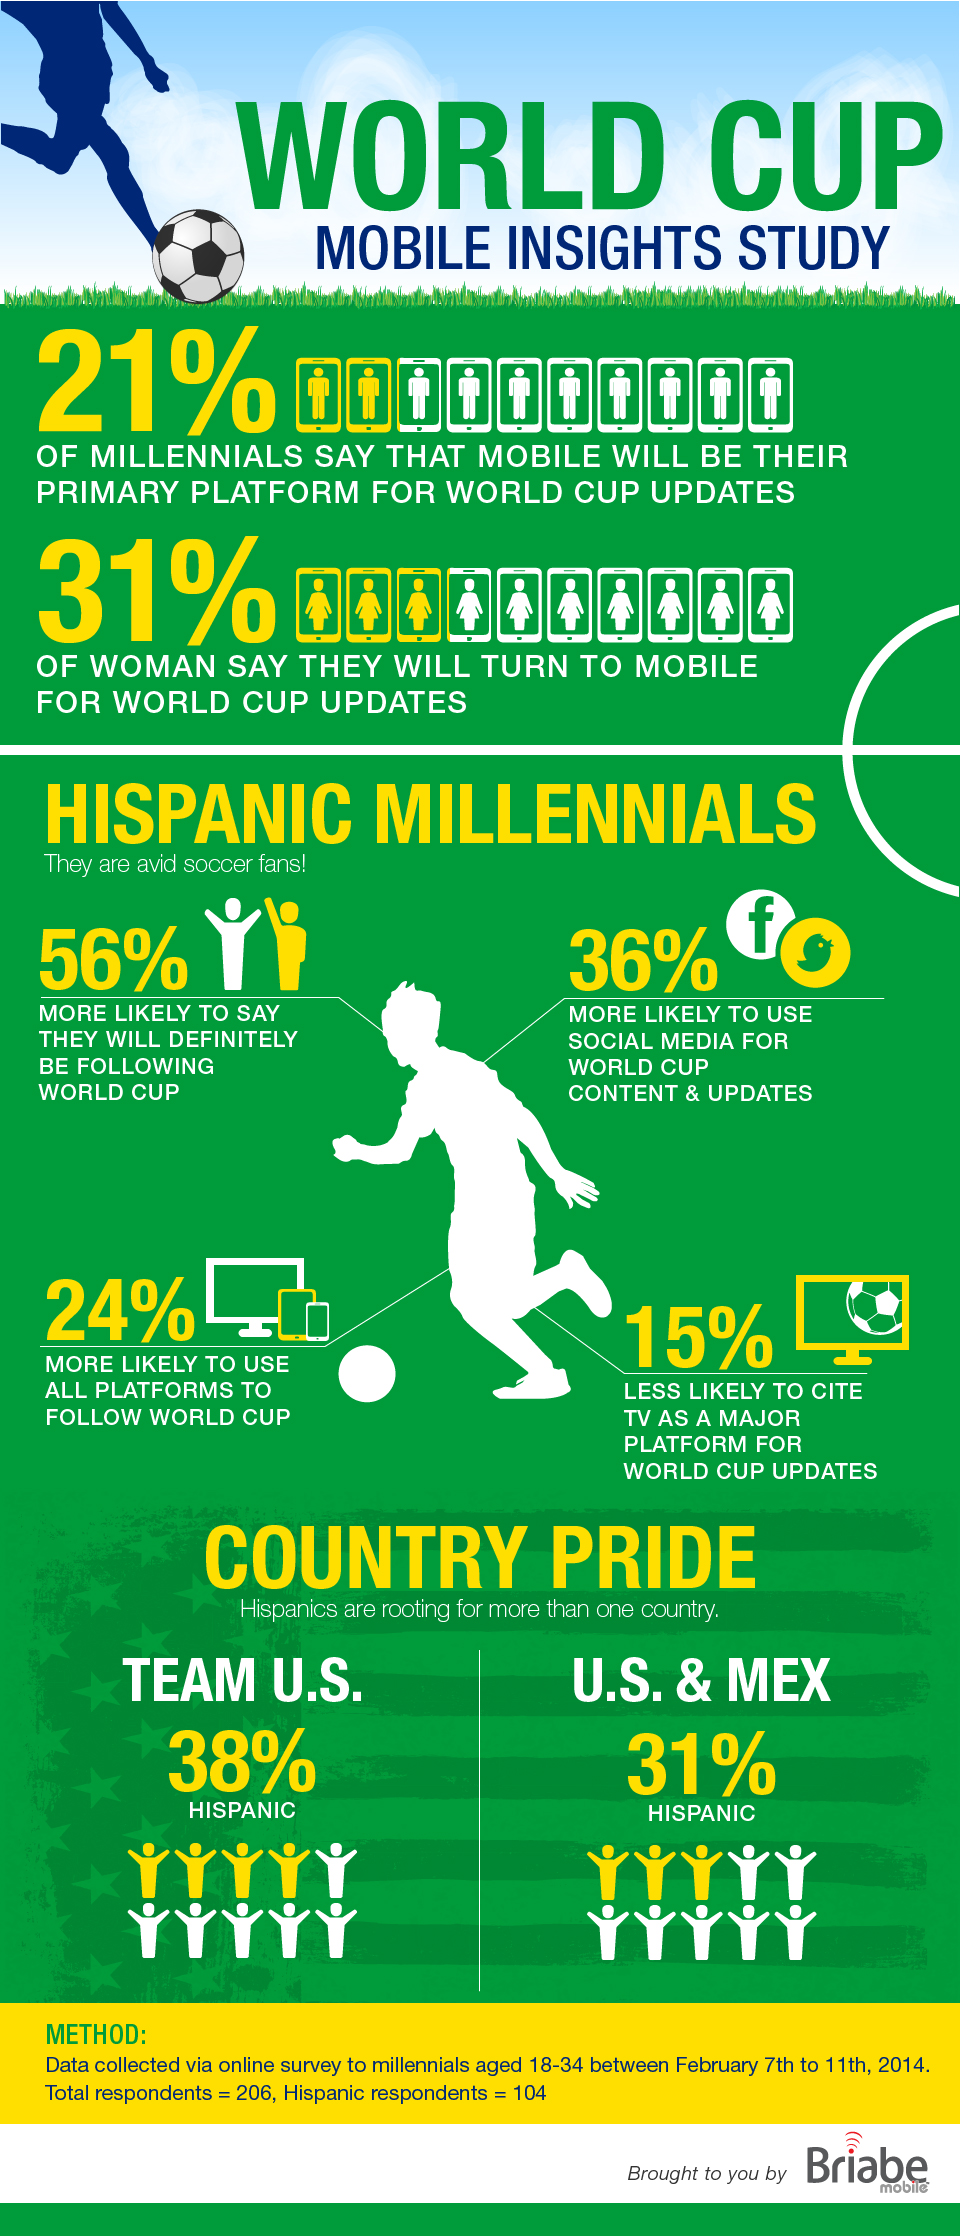 World Cup Mobile Insights Study Infographic